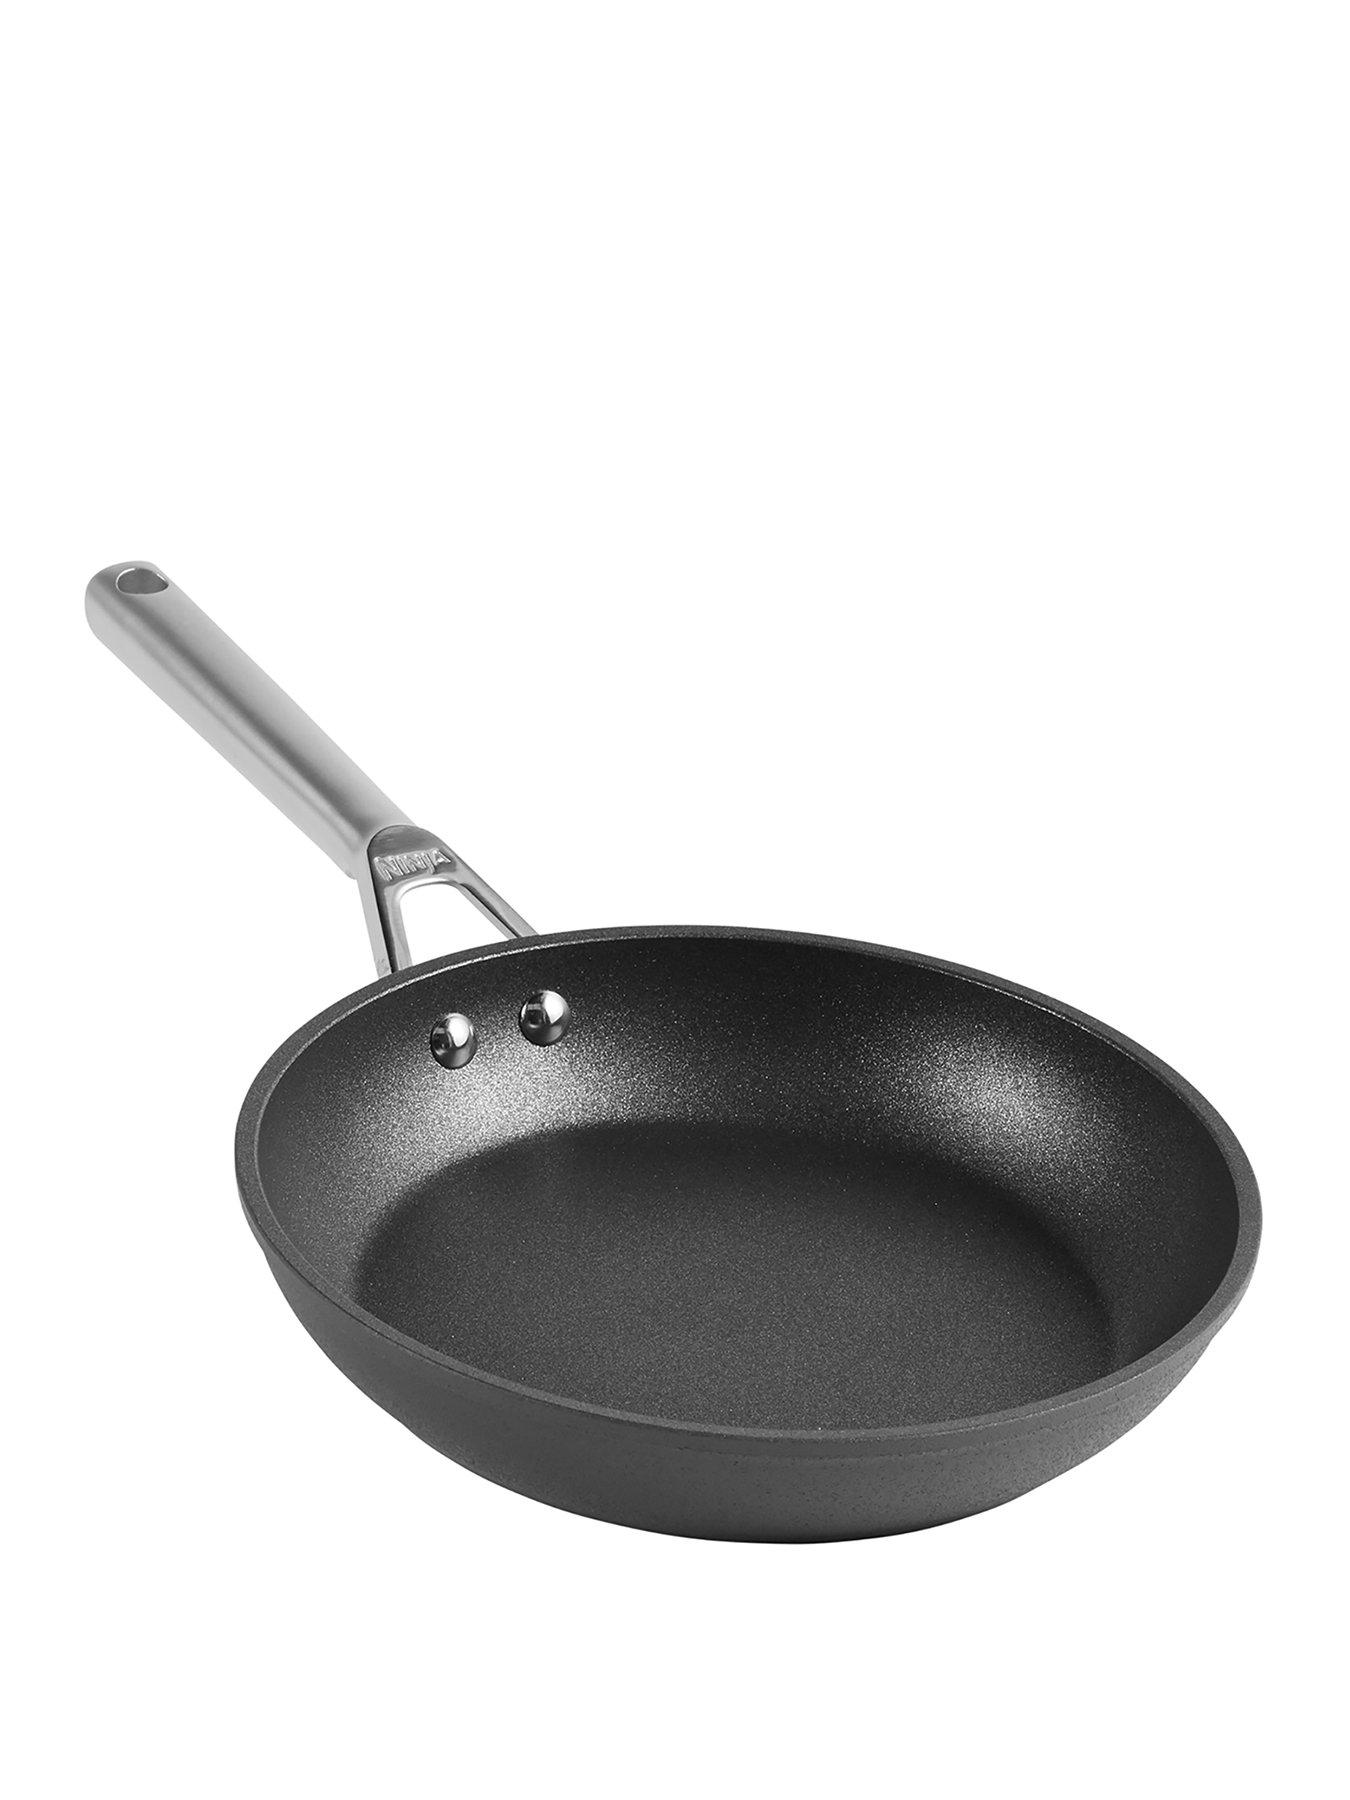 joie eggy Mini Fry Pan Stainless Steel Non-stick Frying Pan for Eggs and  Dumplings Oil Spout Spatula Cookware Pans Kitchen